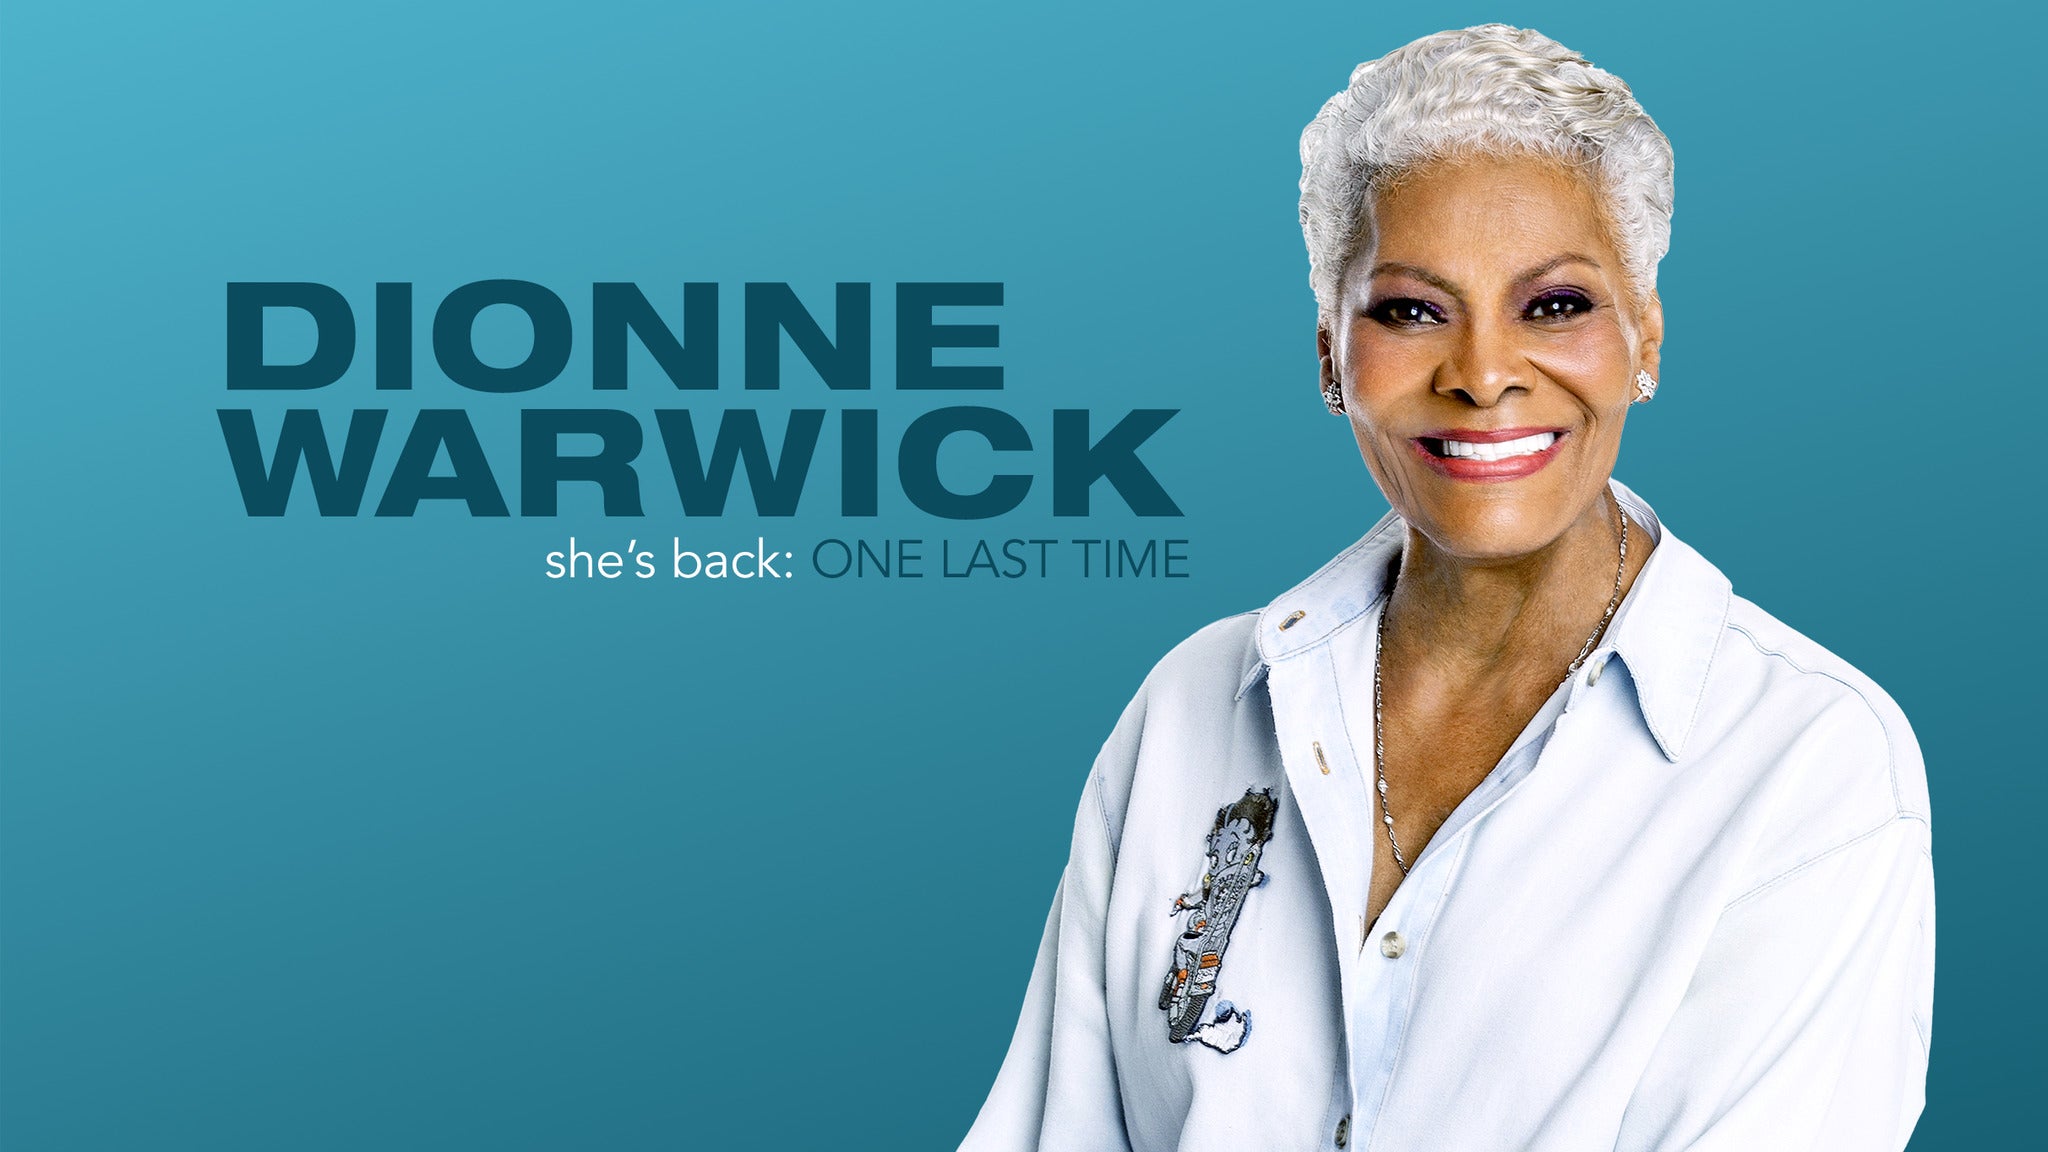 Dionne Warwick - 'ONE LAST TIME' Farewell Tour 2022